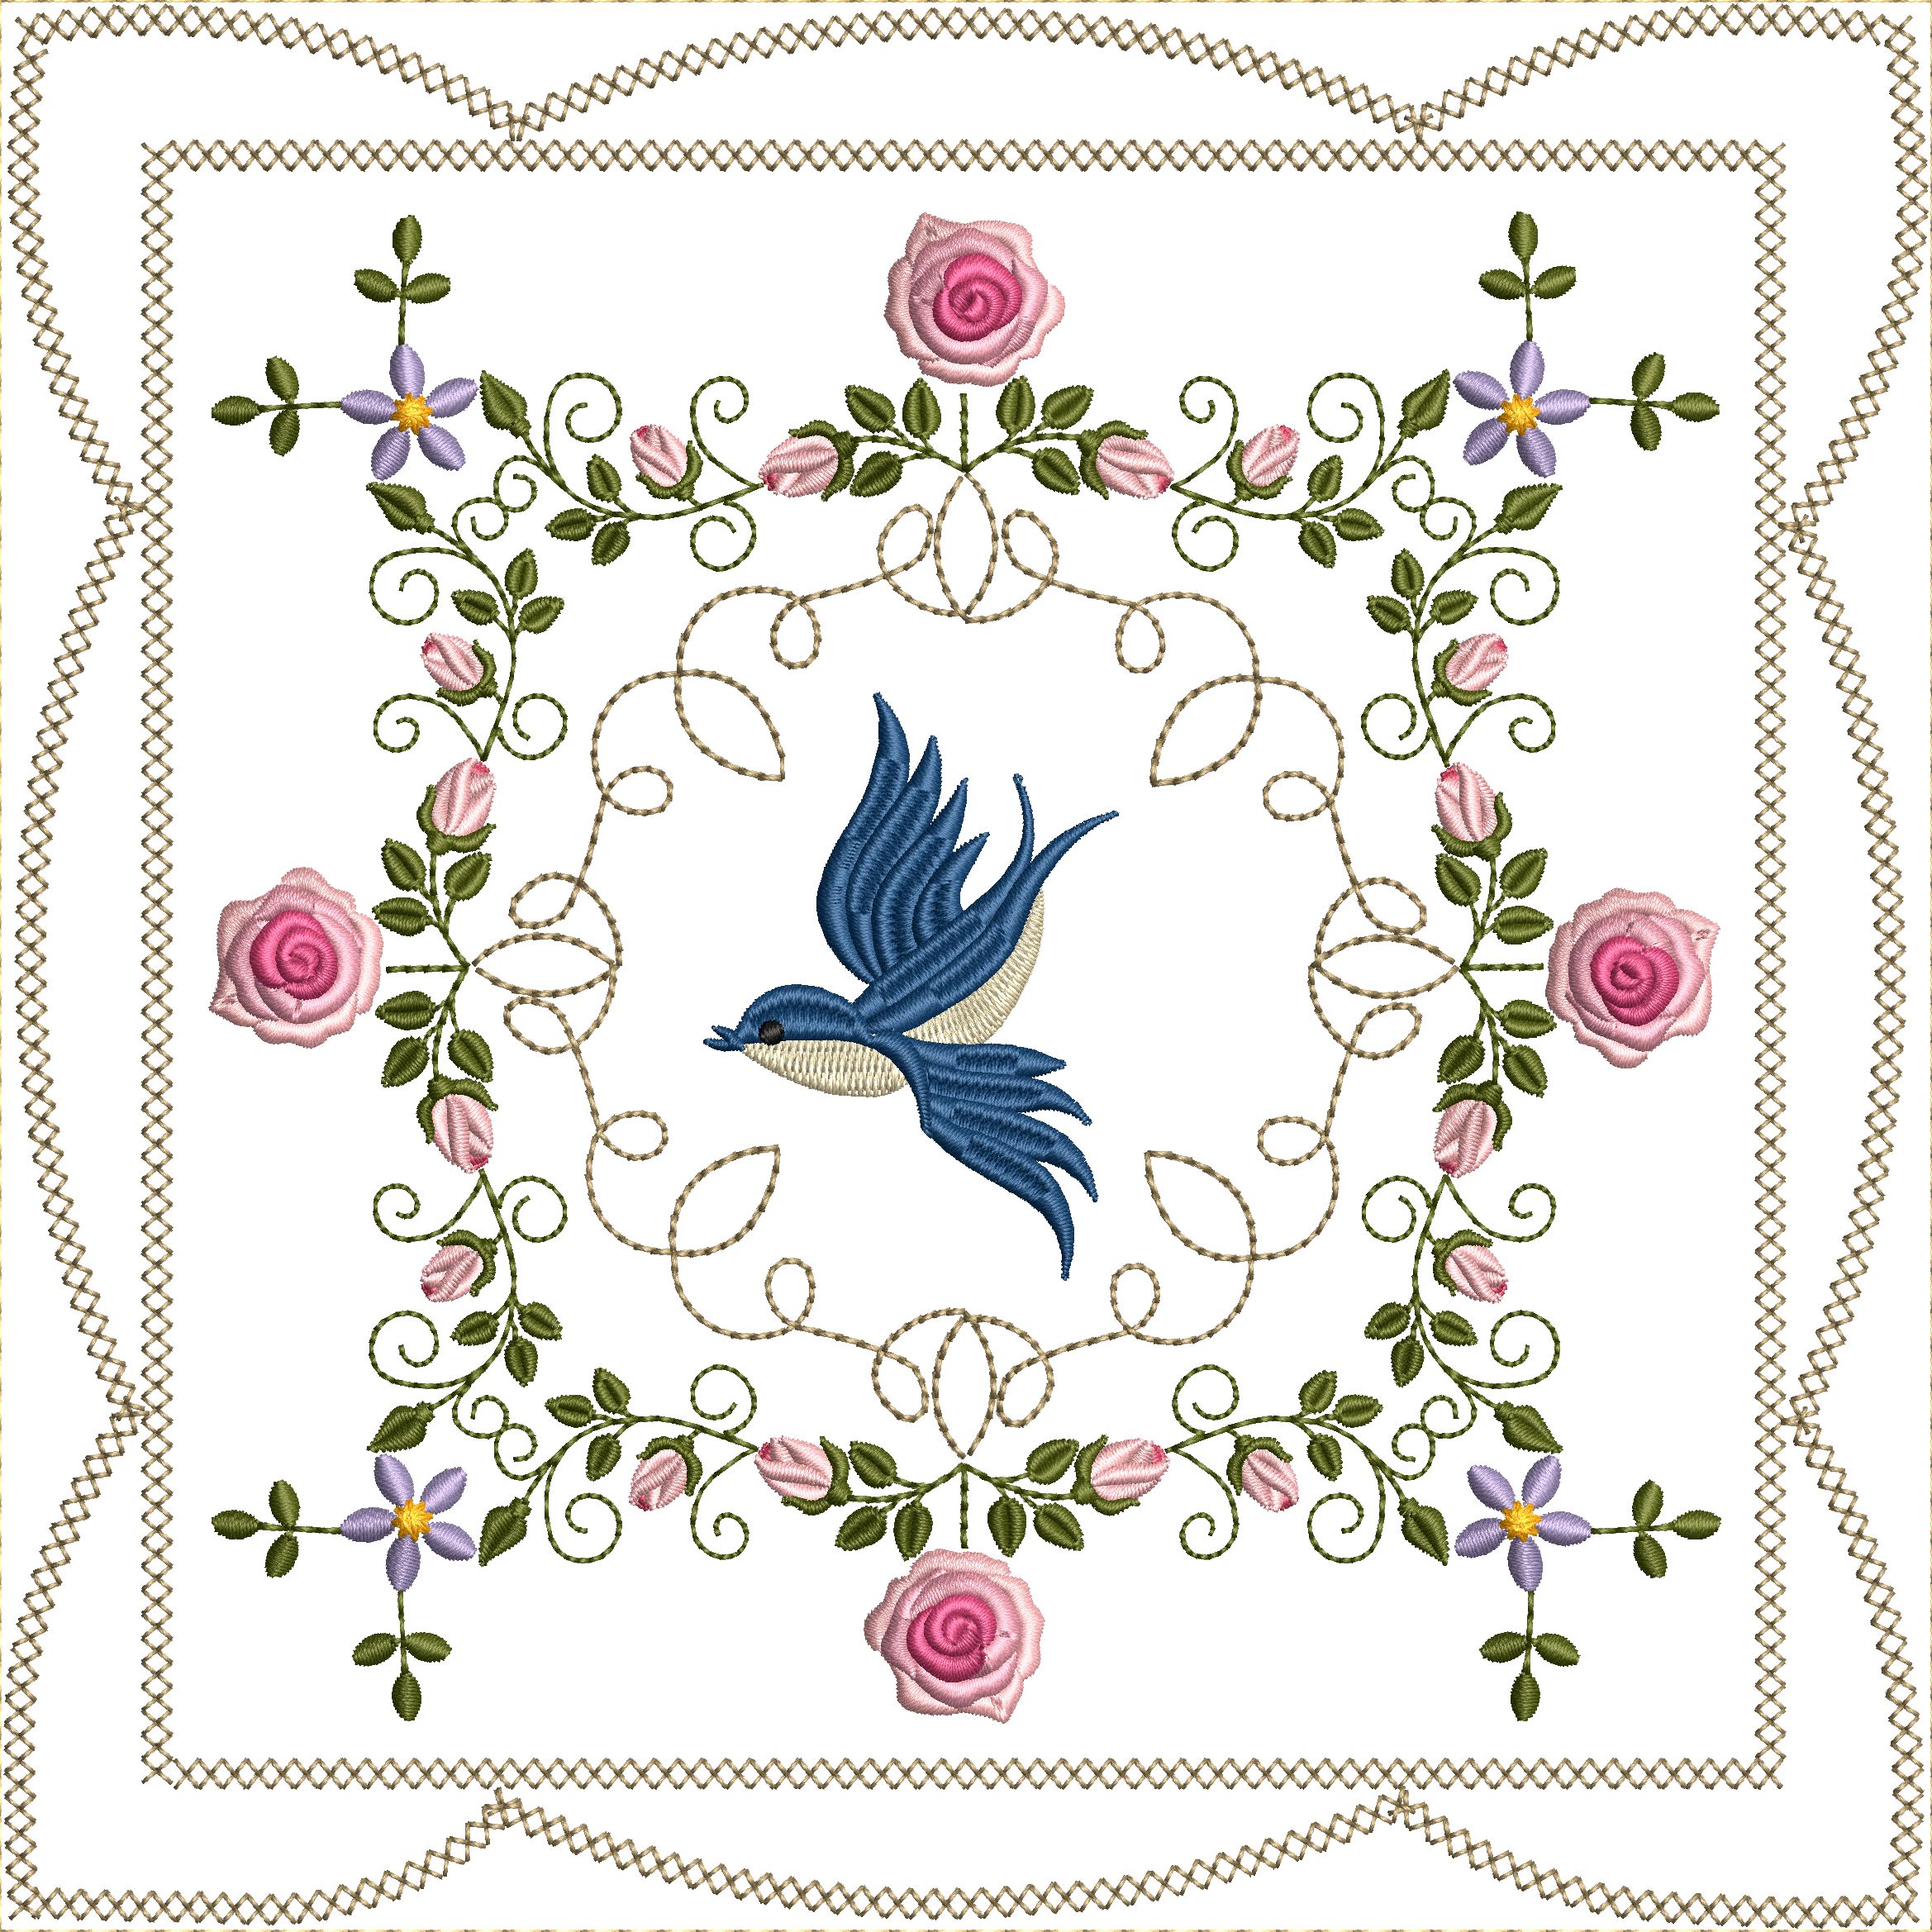 Bluebirds and Roses Quilt Blocks 8x8-20